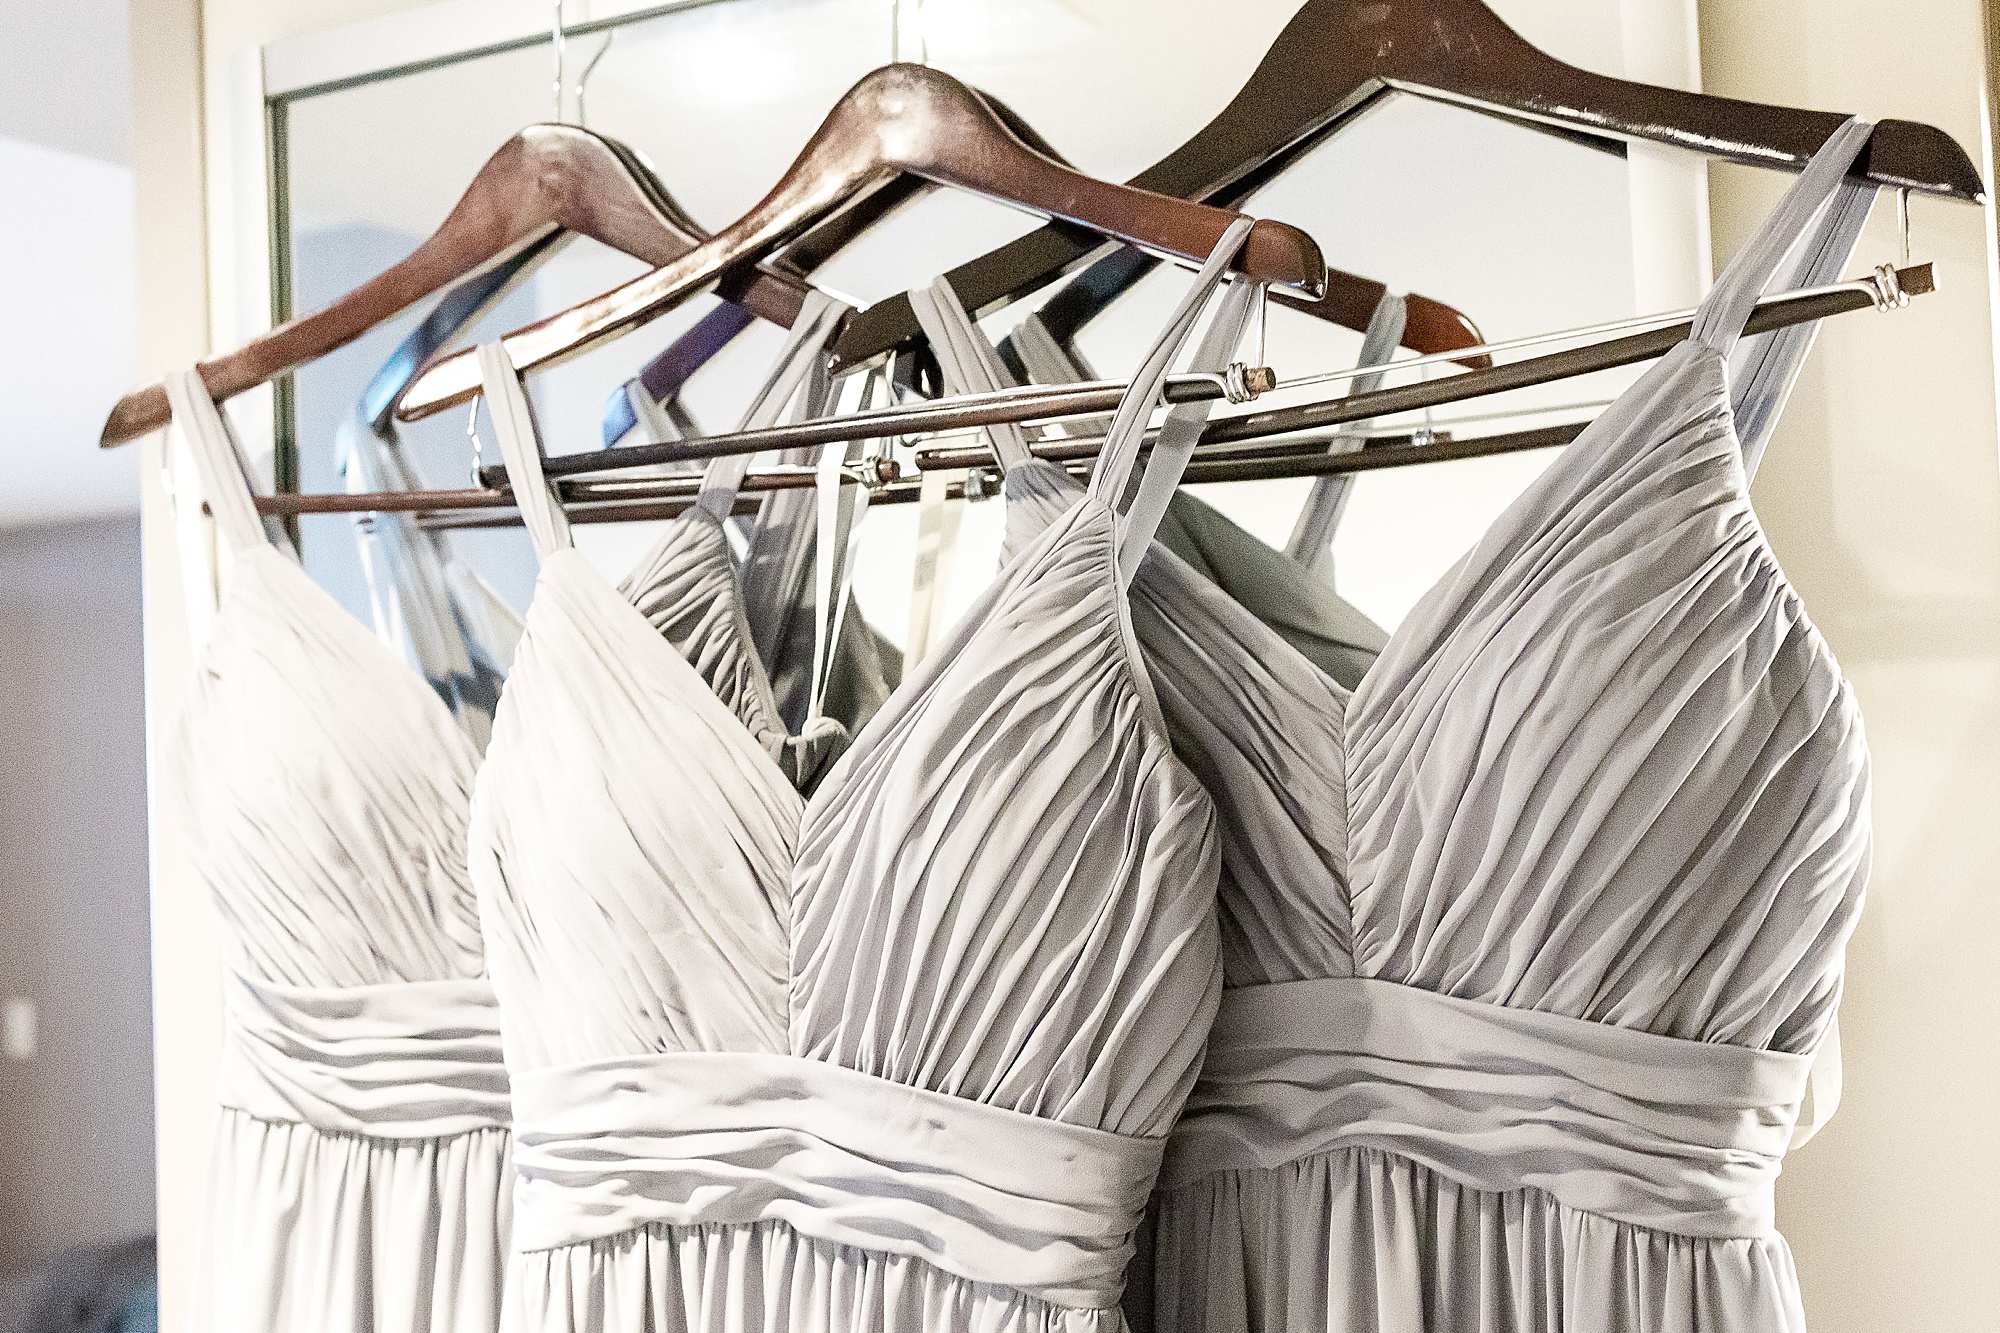 sustainable bridesmaid gowns from Dear Cleo